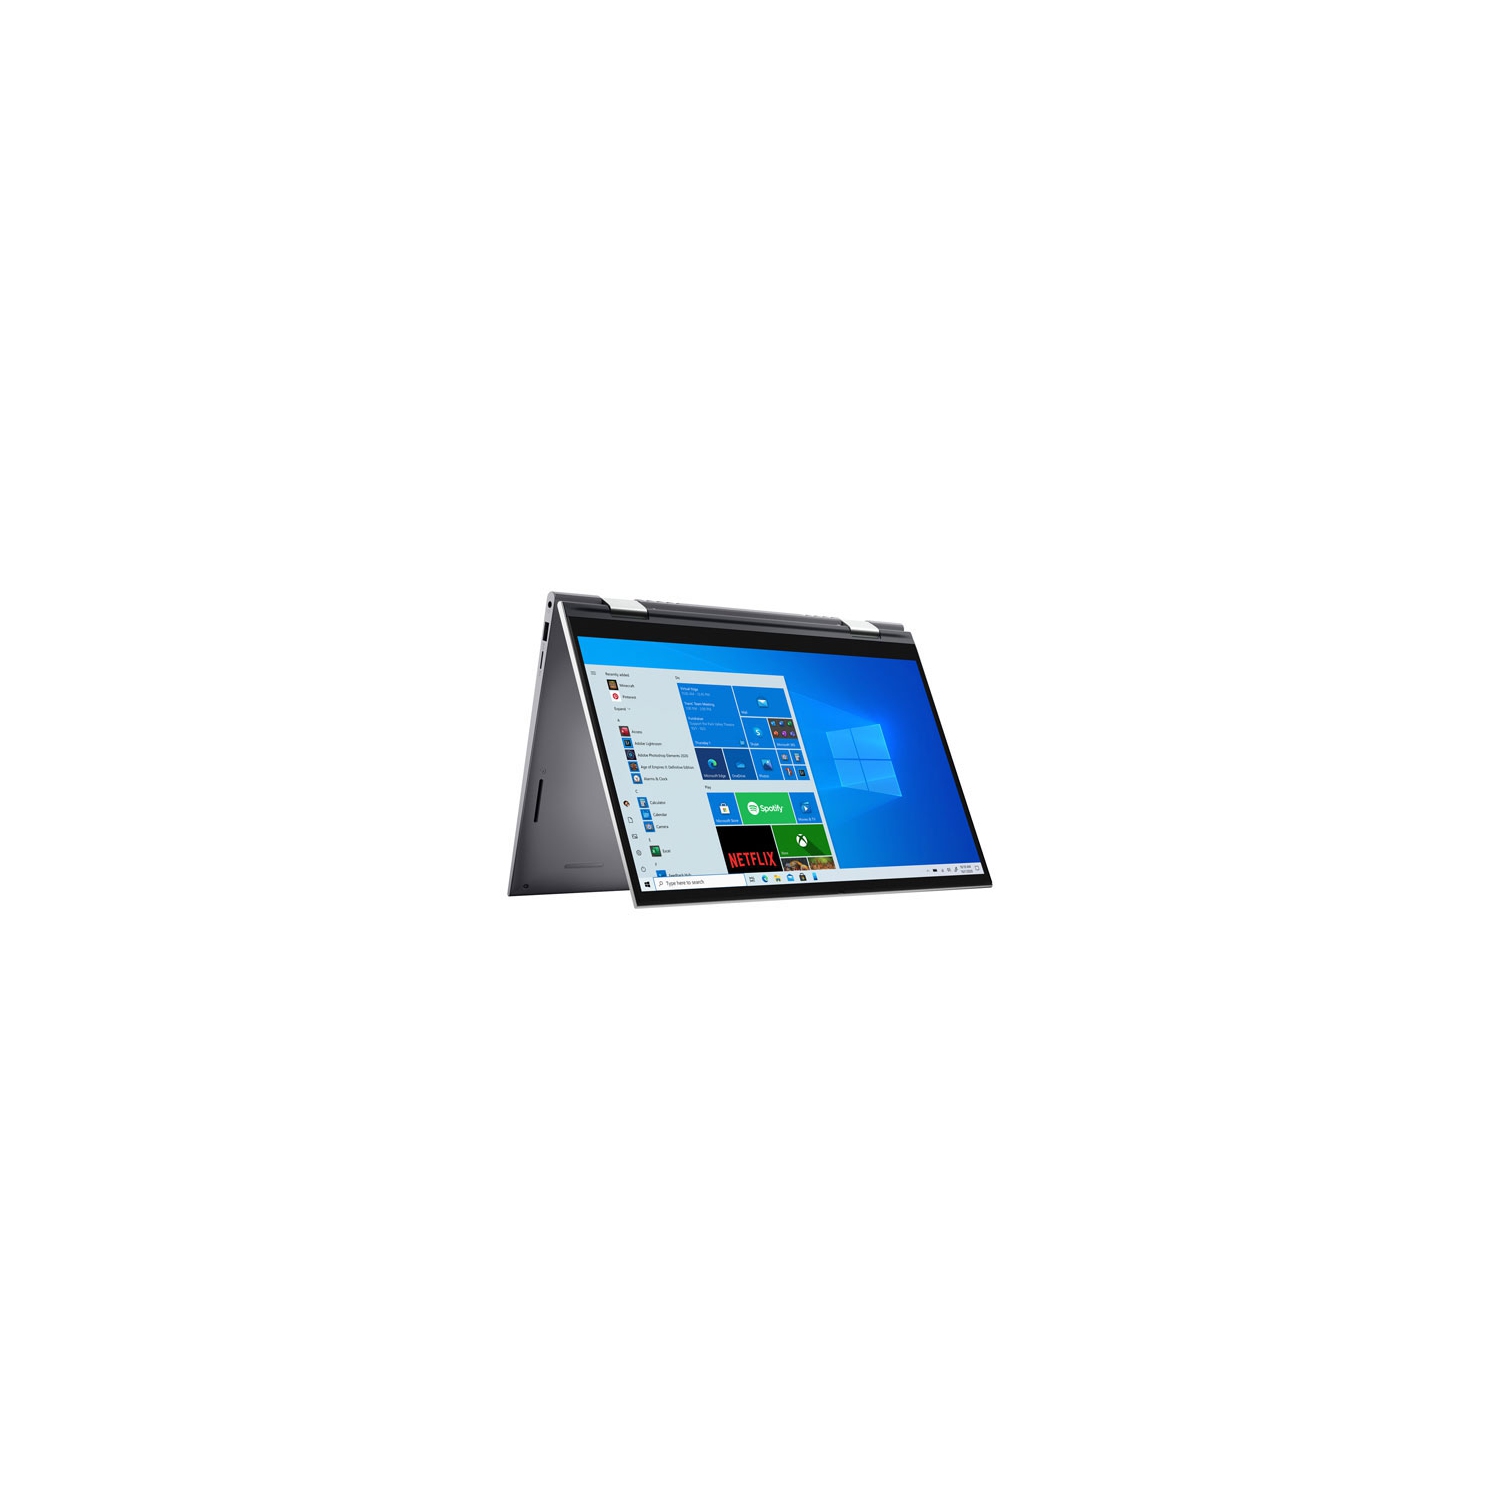 Refurbished (Good) - Dell Inspiron 14" Touchscreen 2-in-1 Laptop - Silver (Intel Core i5-1155G7/256GB SSD/8GB RAM)